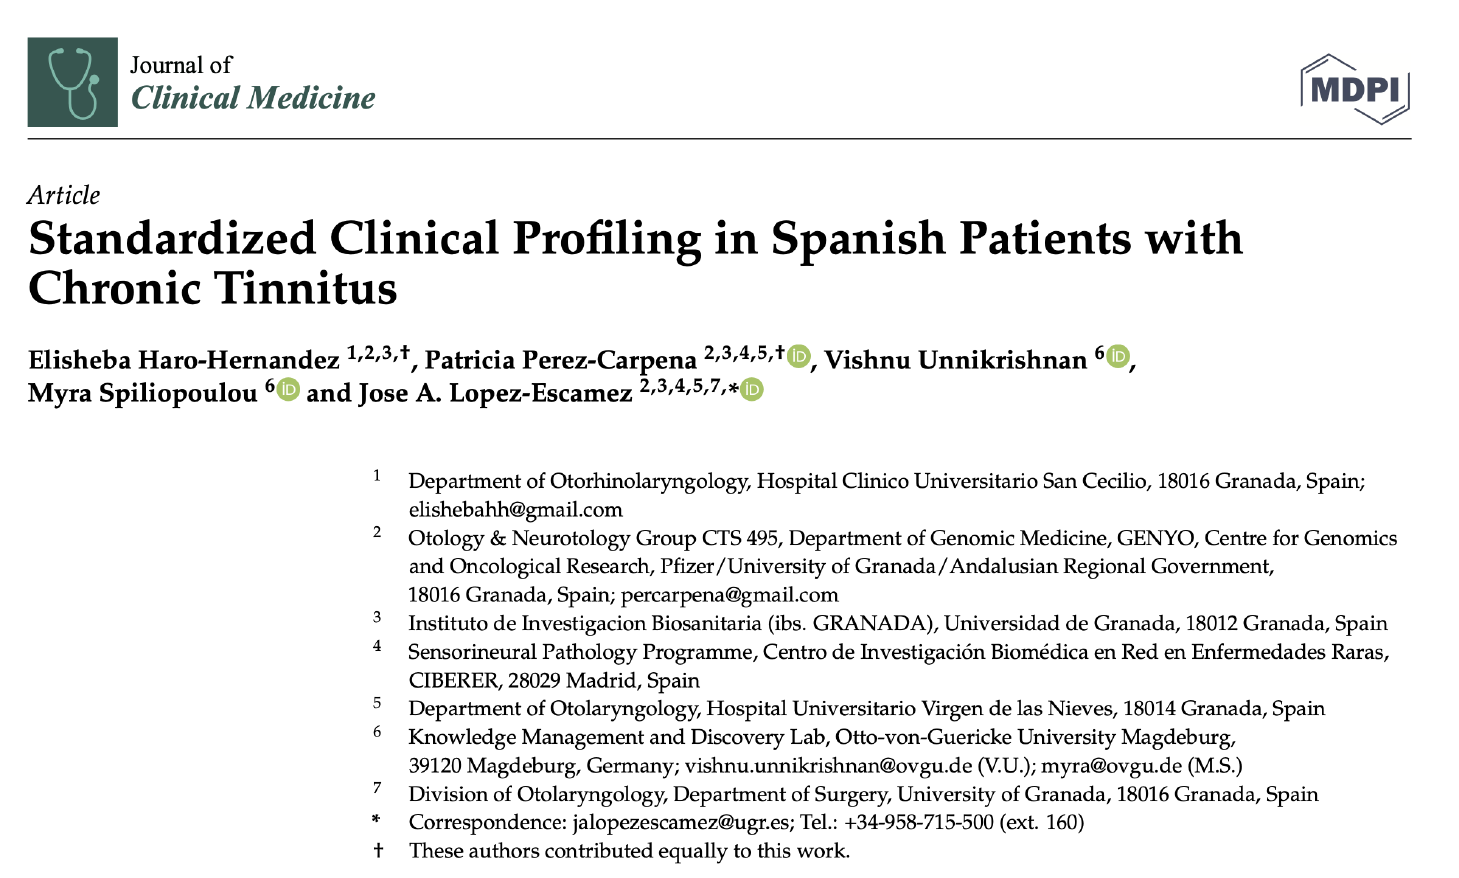 Standardized Clinical Profiling in Spanish Patients